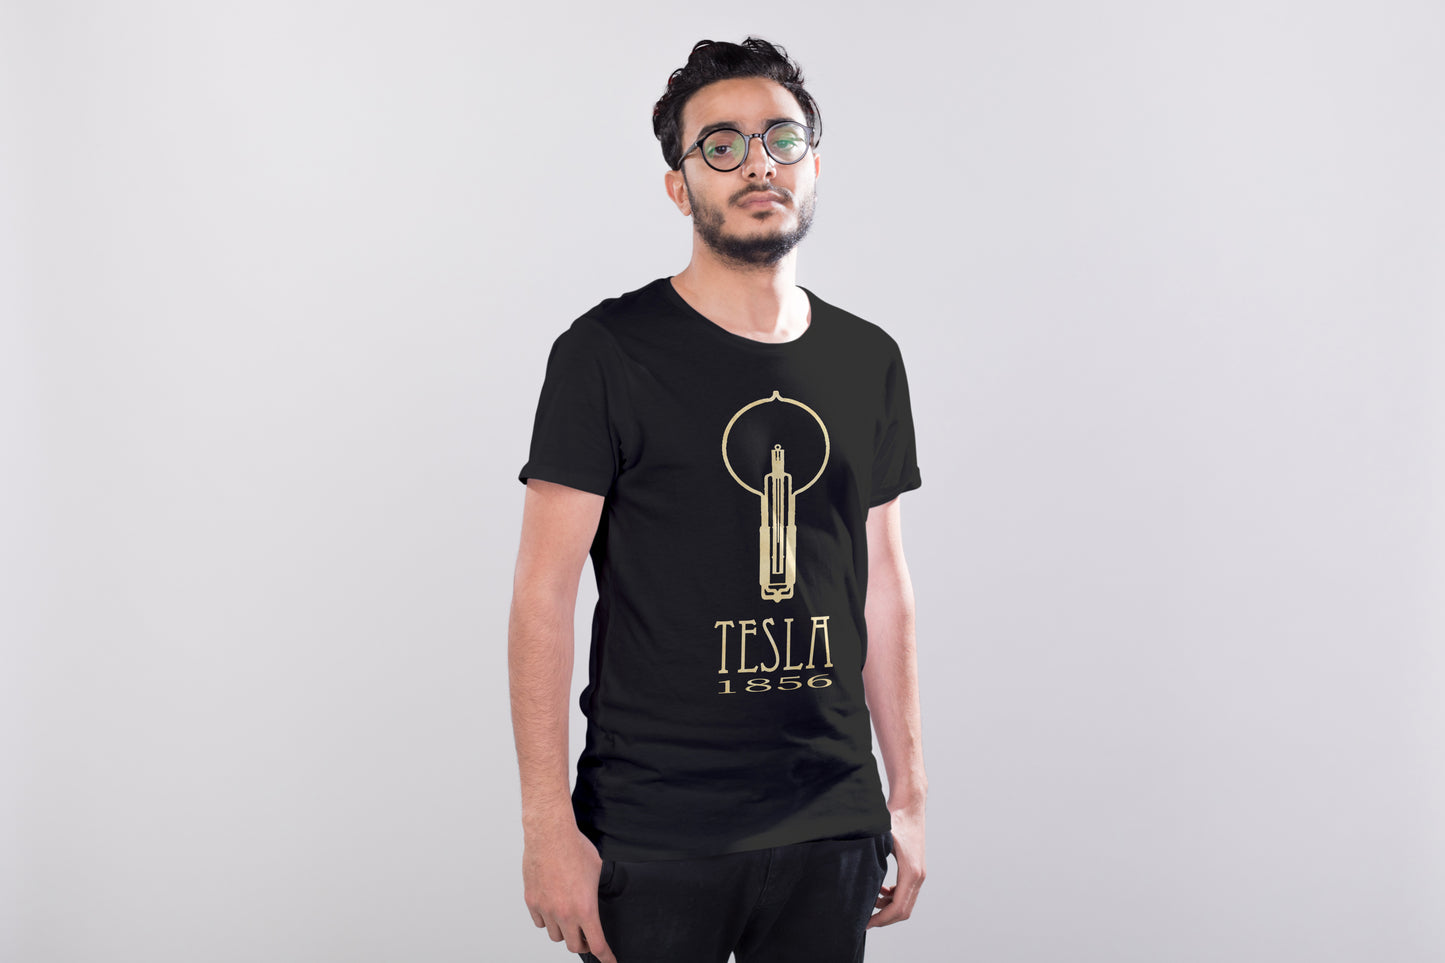 Tesla Scientist T-shirt, Inventor and Engineer Graphic Tee